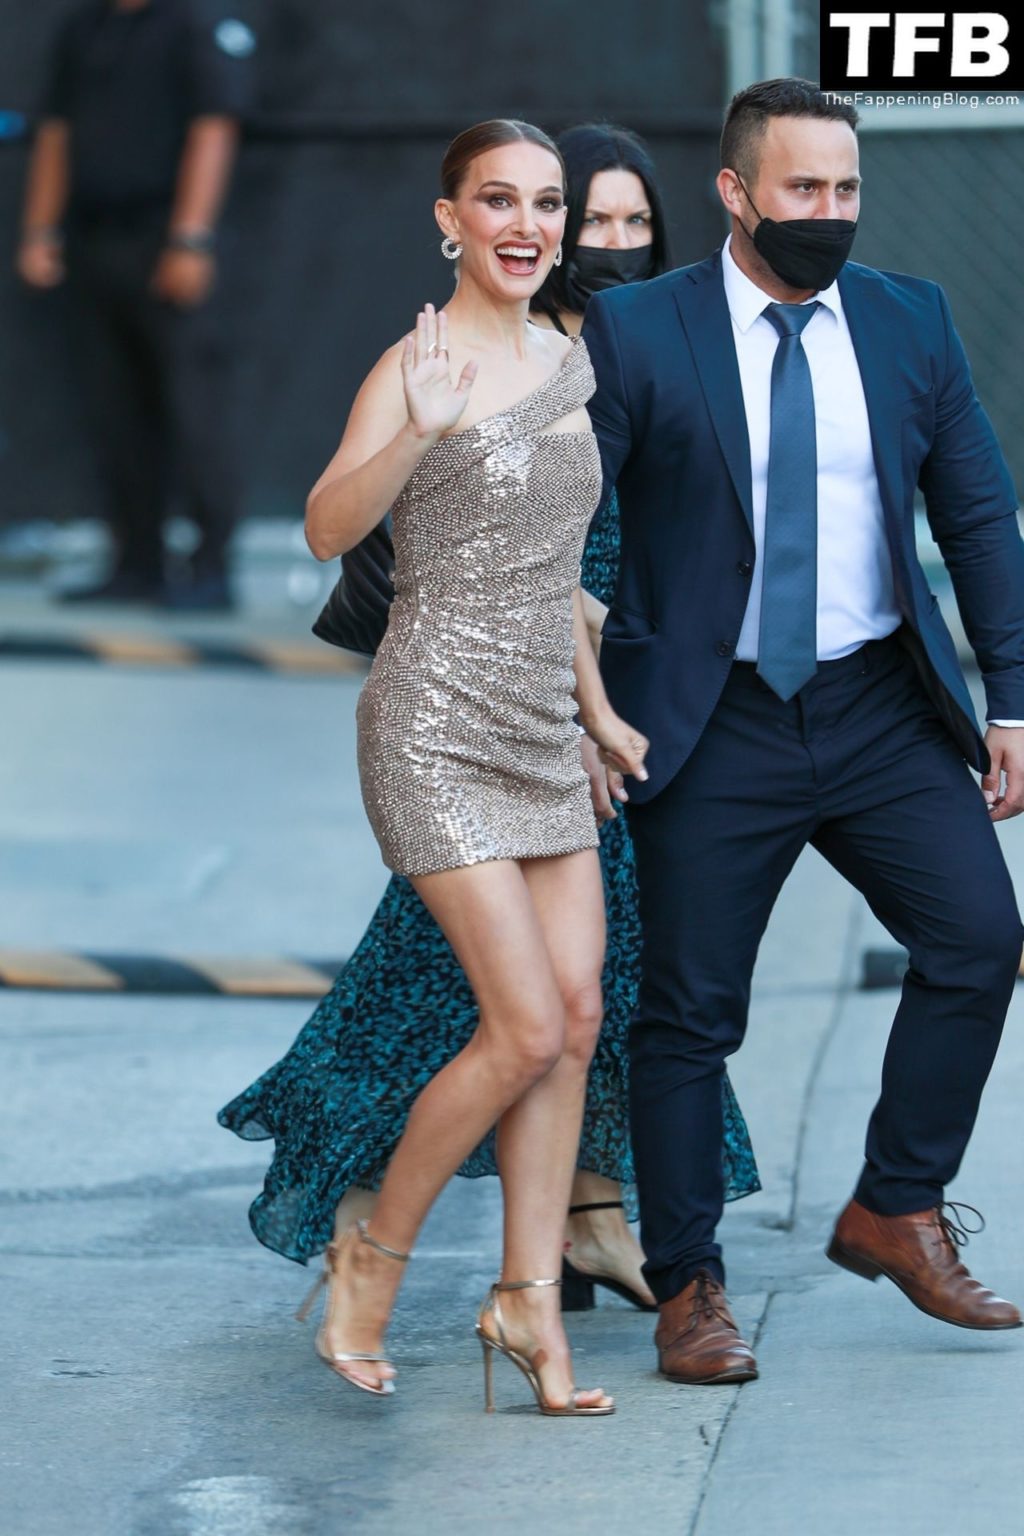 Natalie Portman Looks Hot in a Sequin Dress at Jimmy Kimmel Live! Ahead of Her “Thor” Premiere (11 Photos)